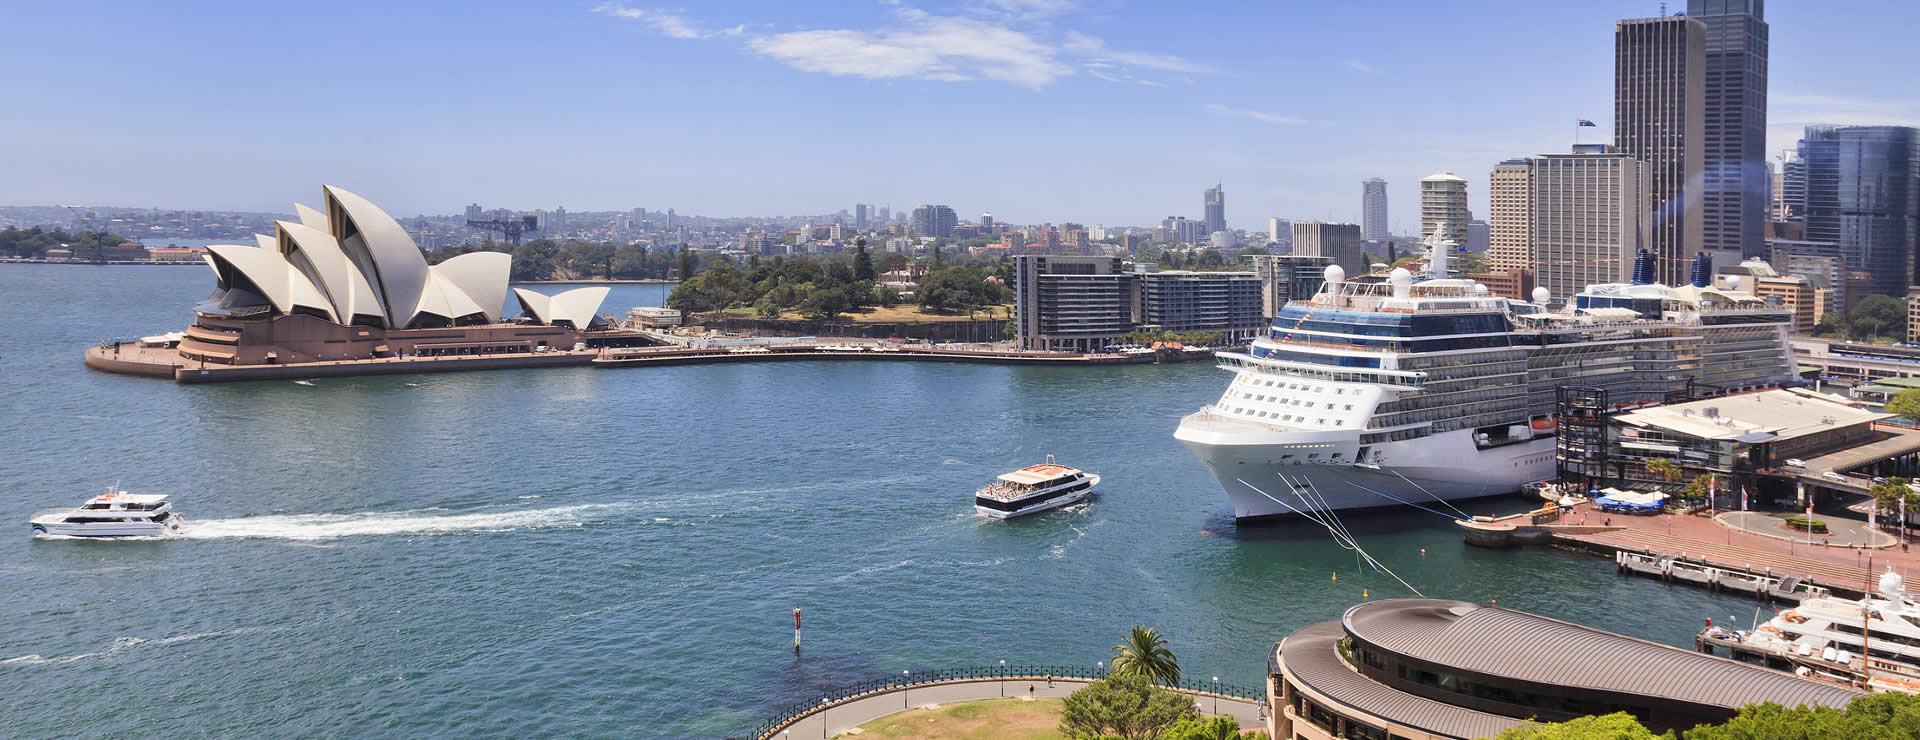 Sydney cruise port terminal and downtown area